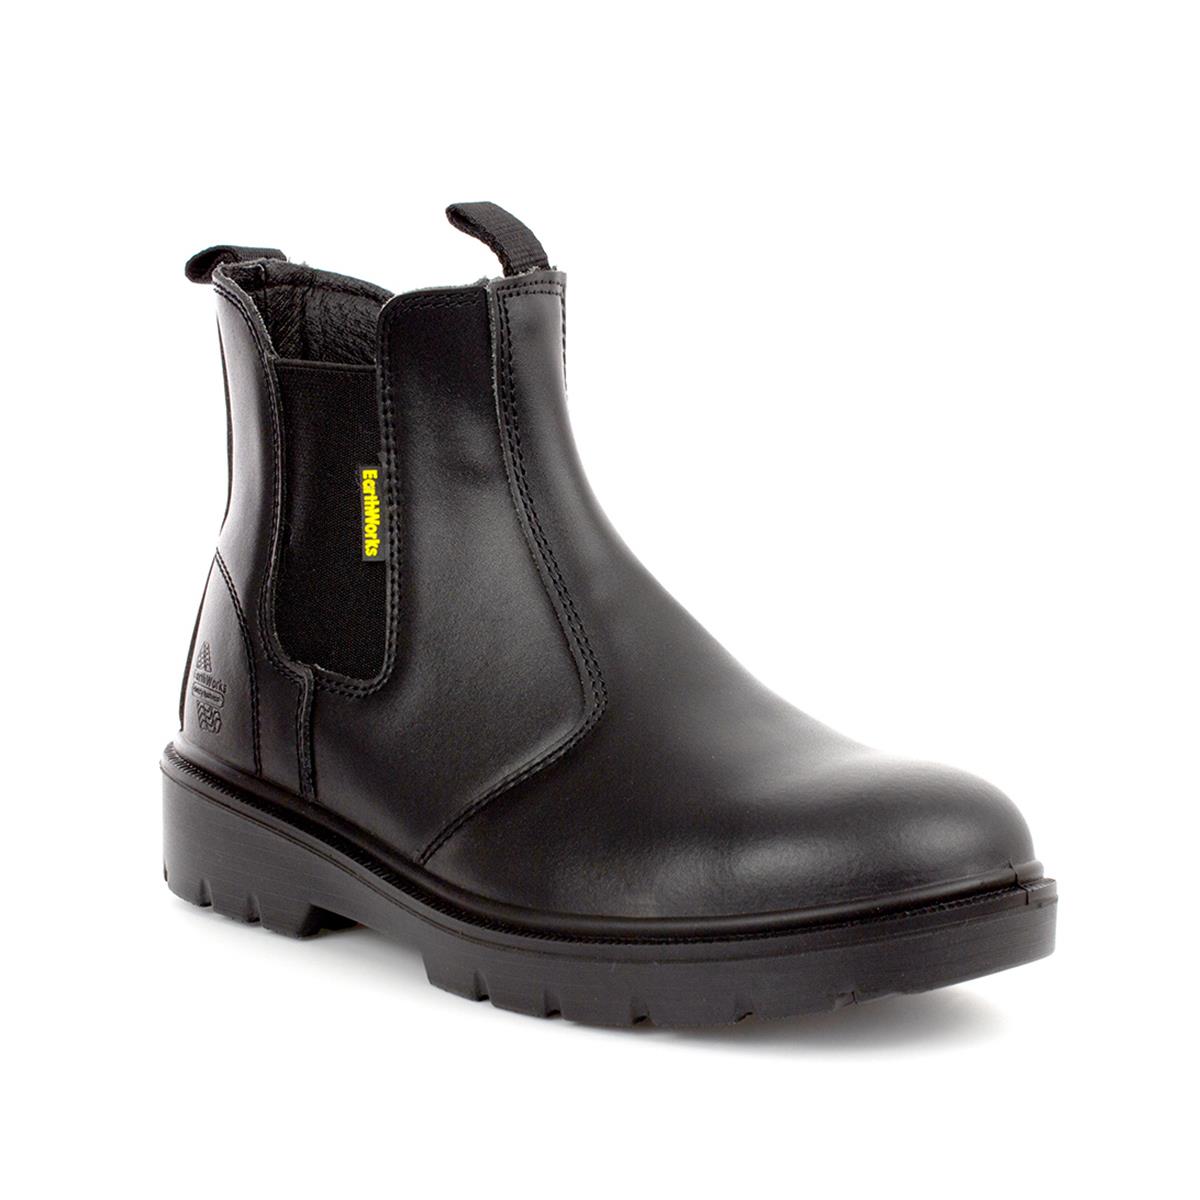 men's black leather work boots